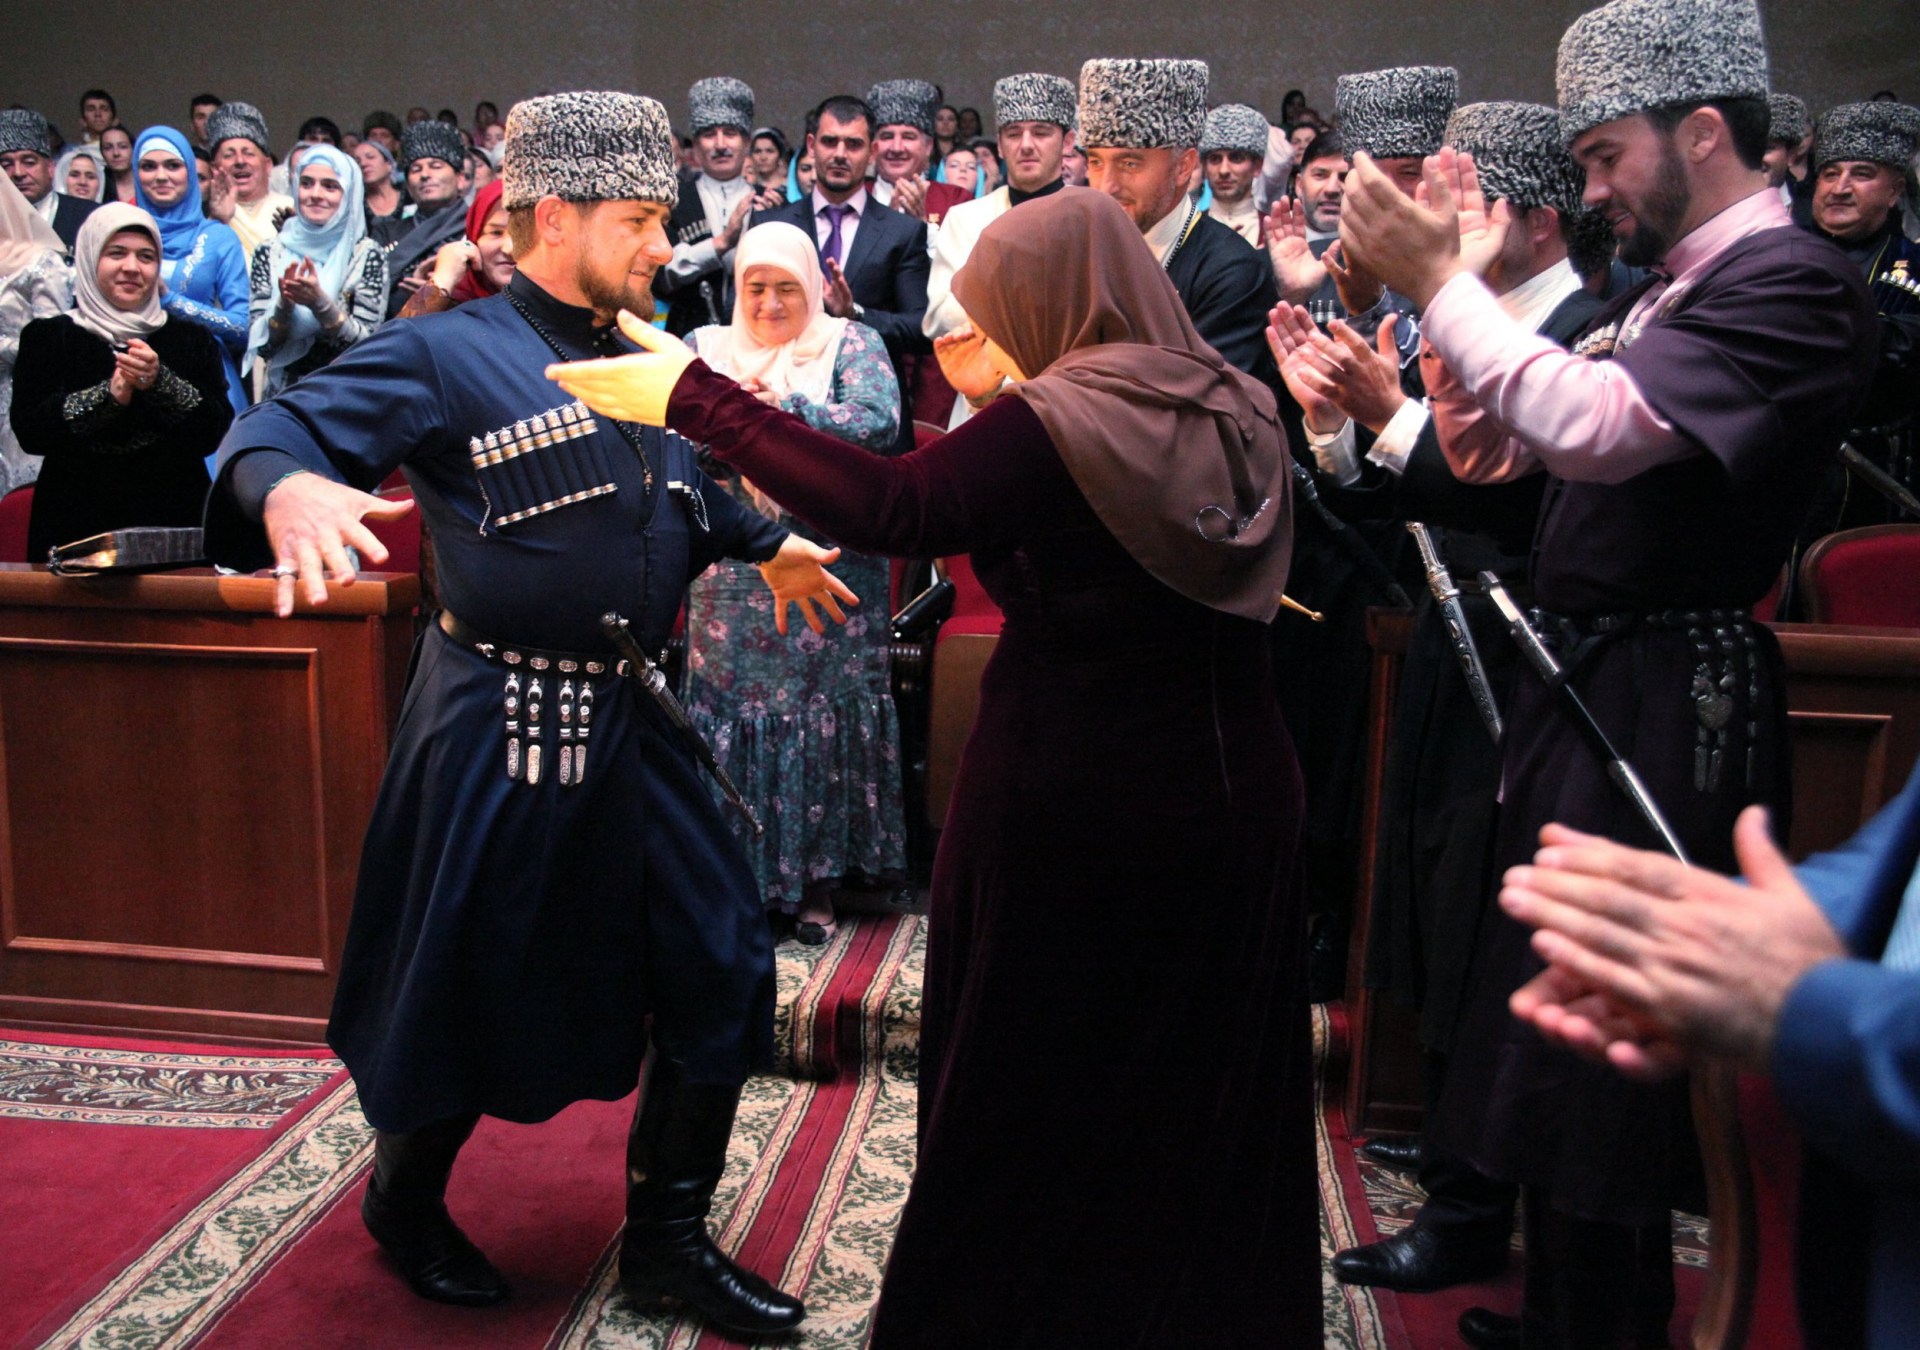 chechen leader says his music ban was just a 'suggestion' after backlash